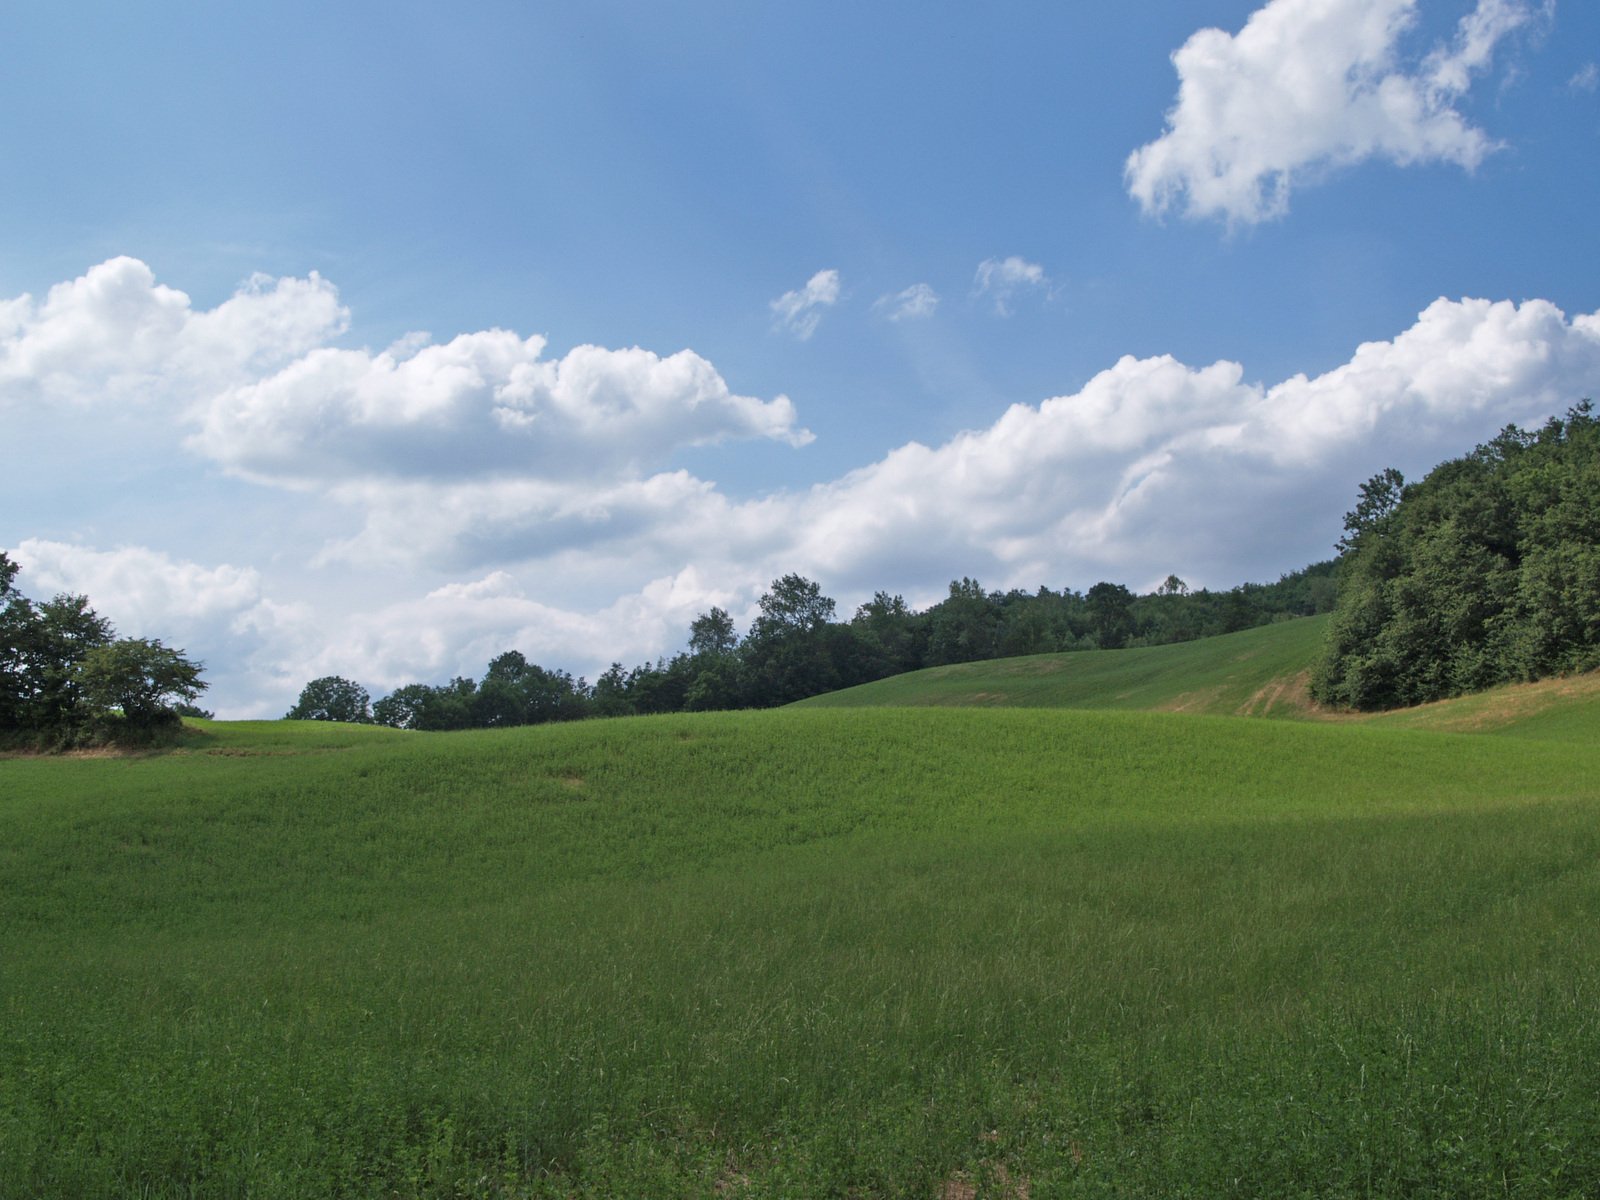 green grass and a hillside with blue sky in the background